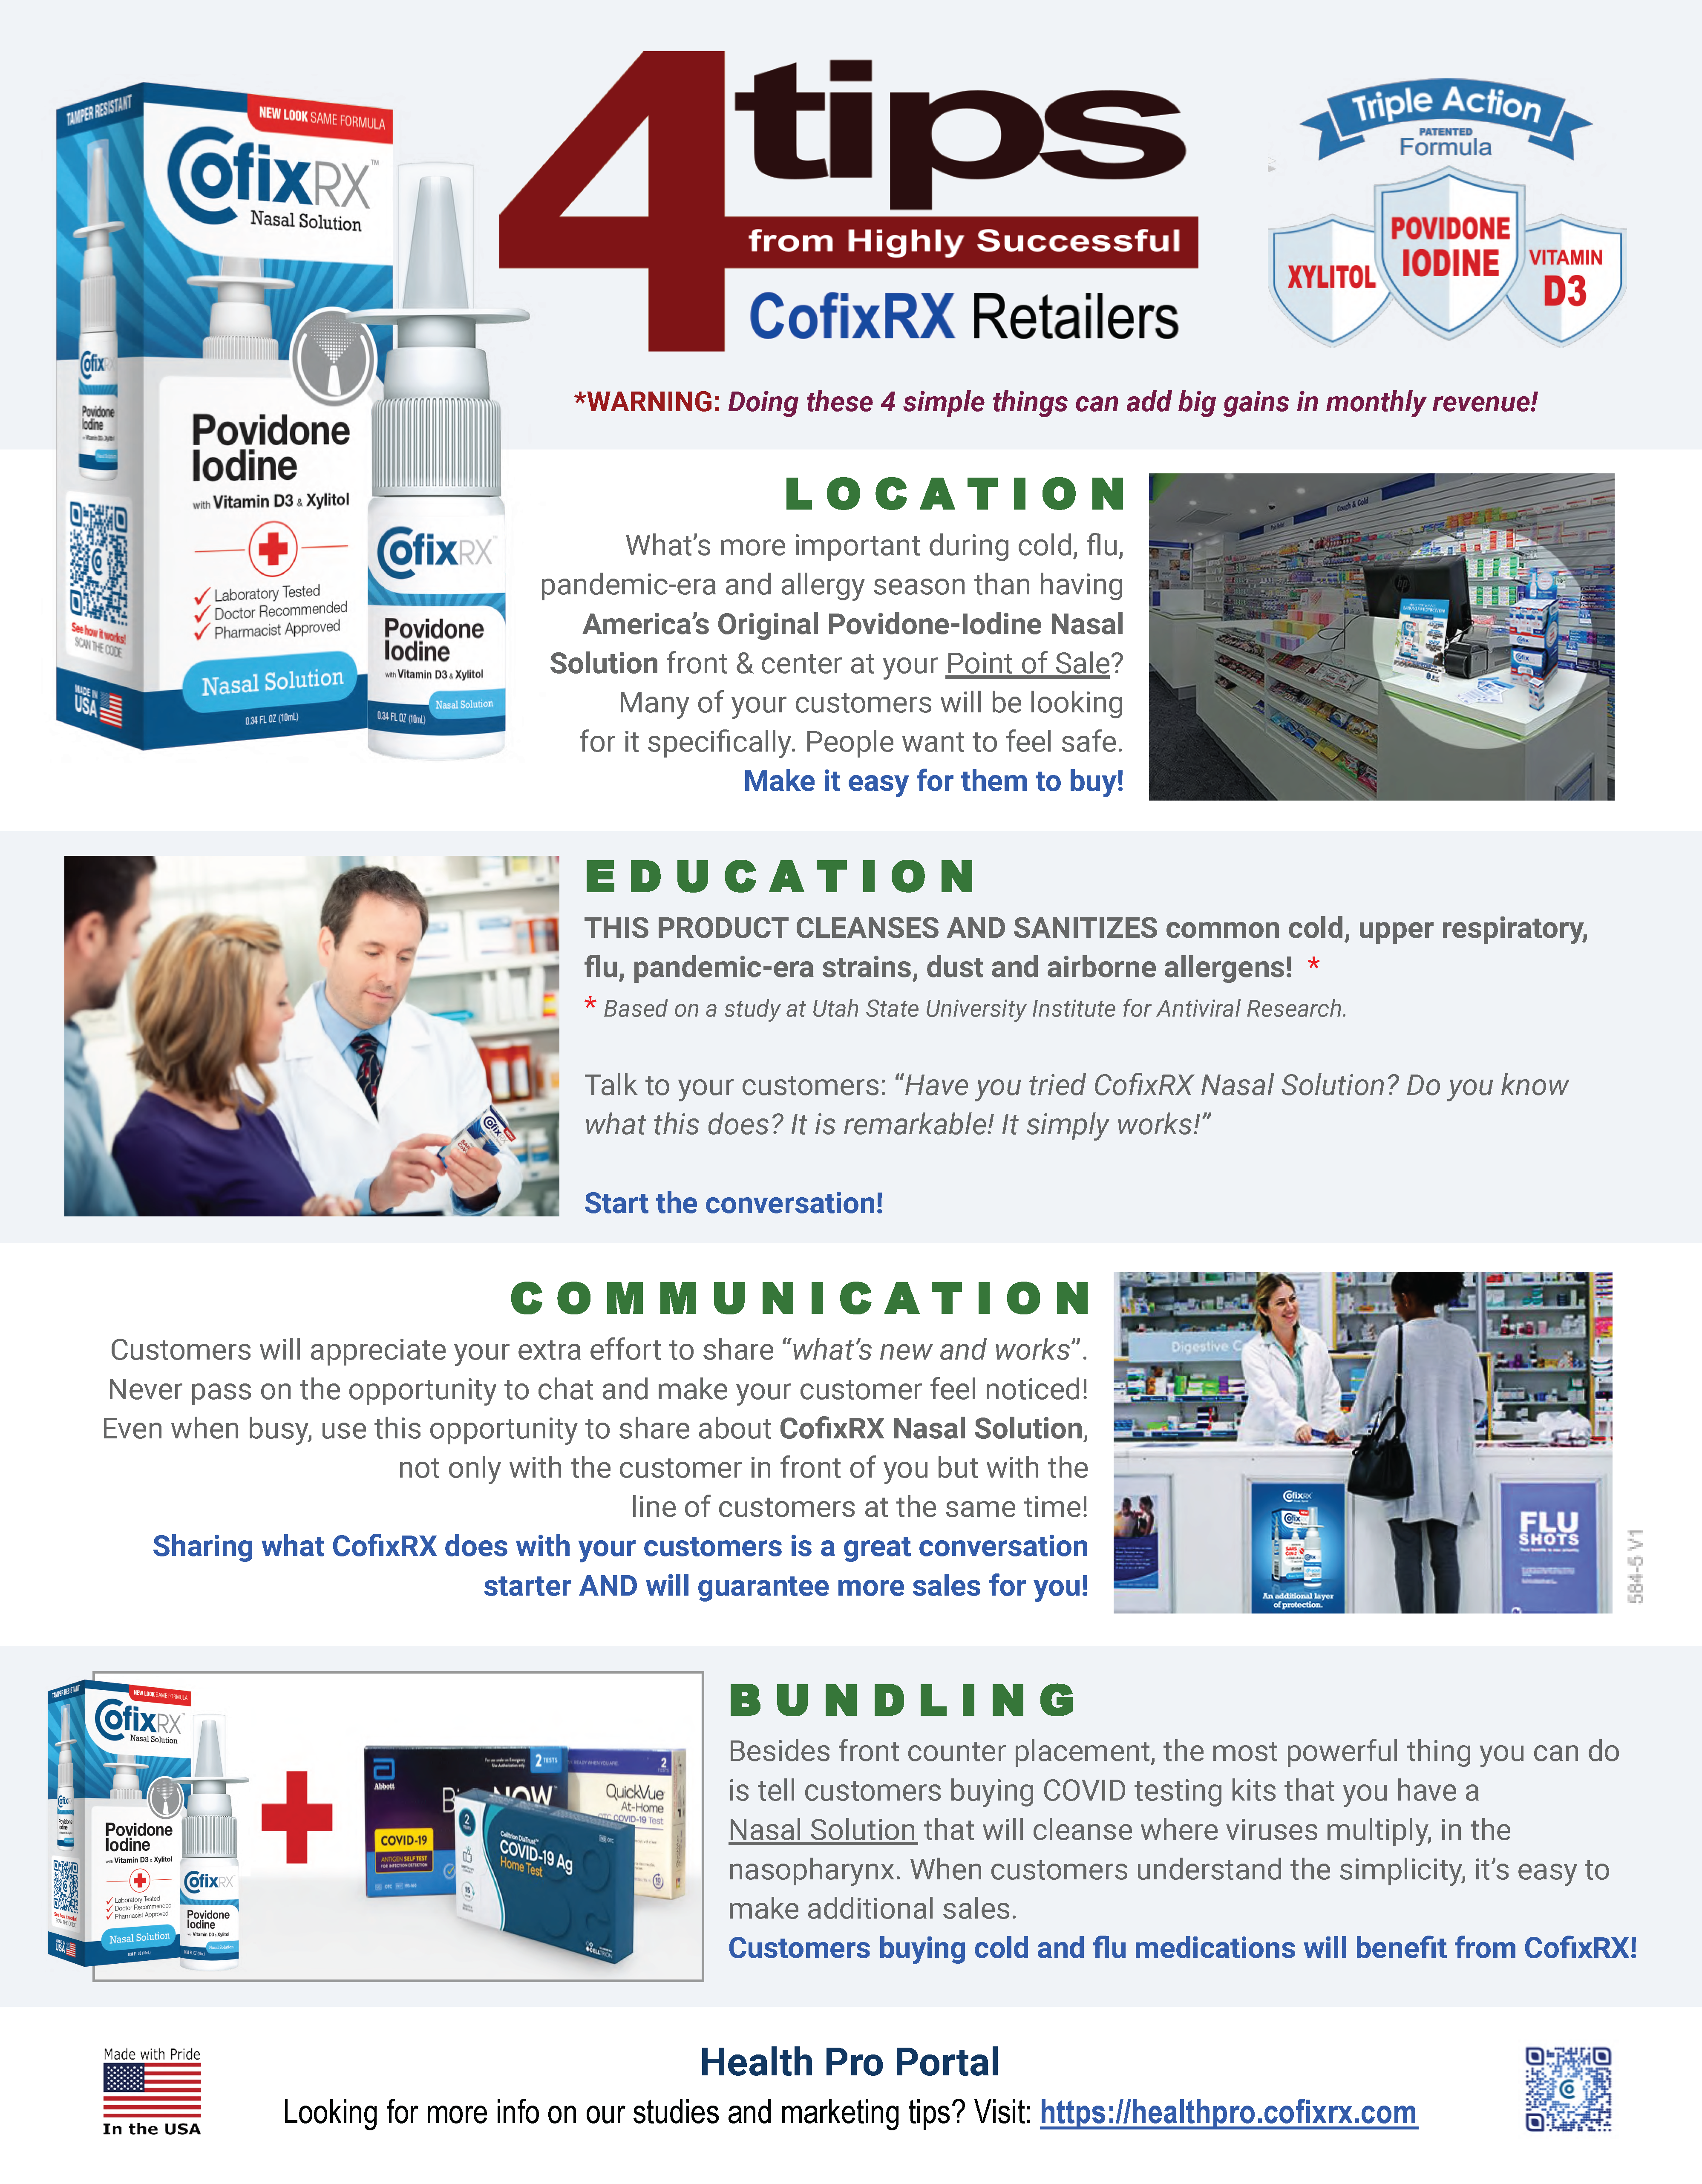 Four Tips from Highly Successful CofixRX Retailers